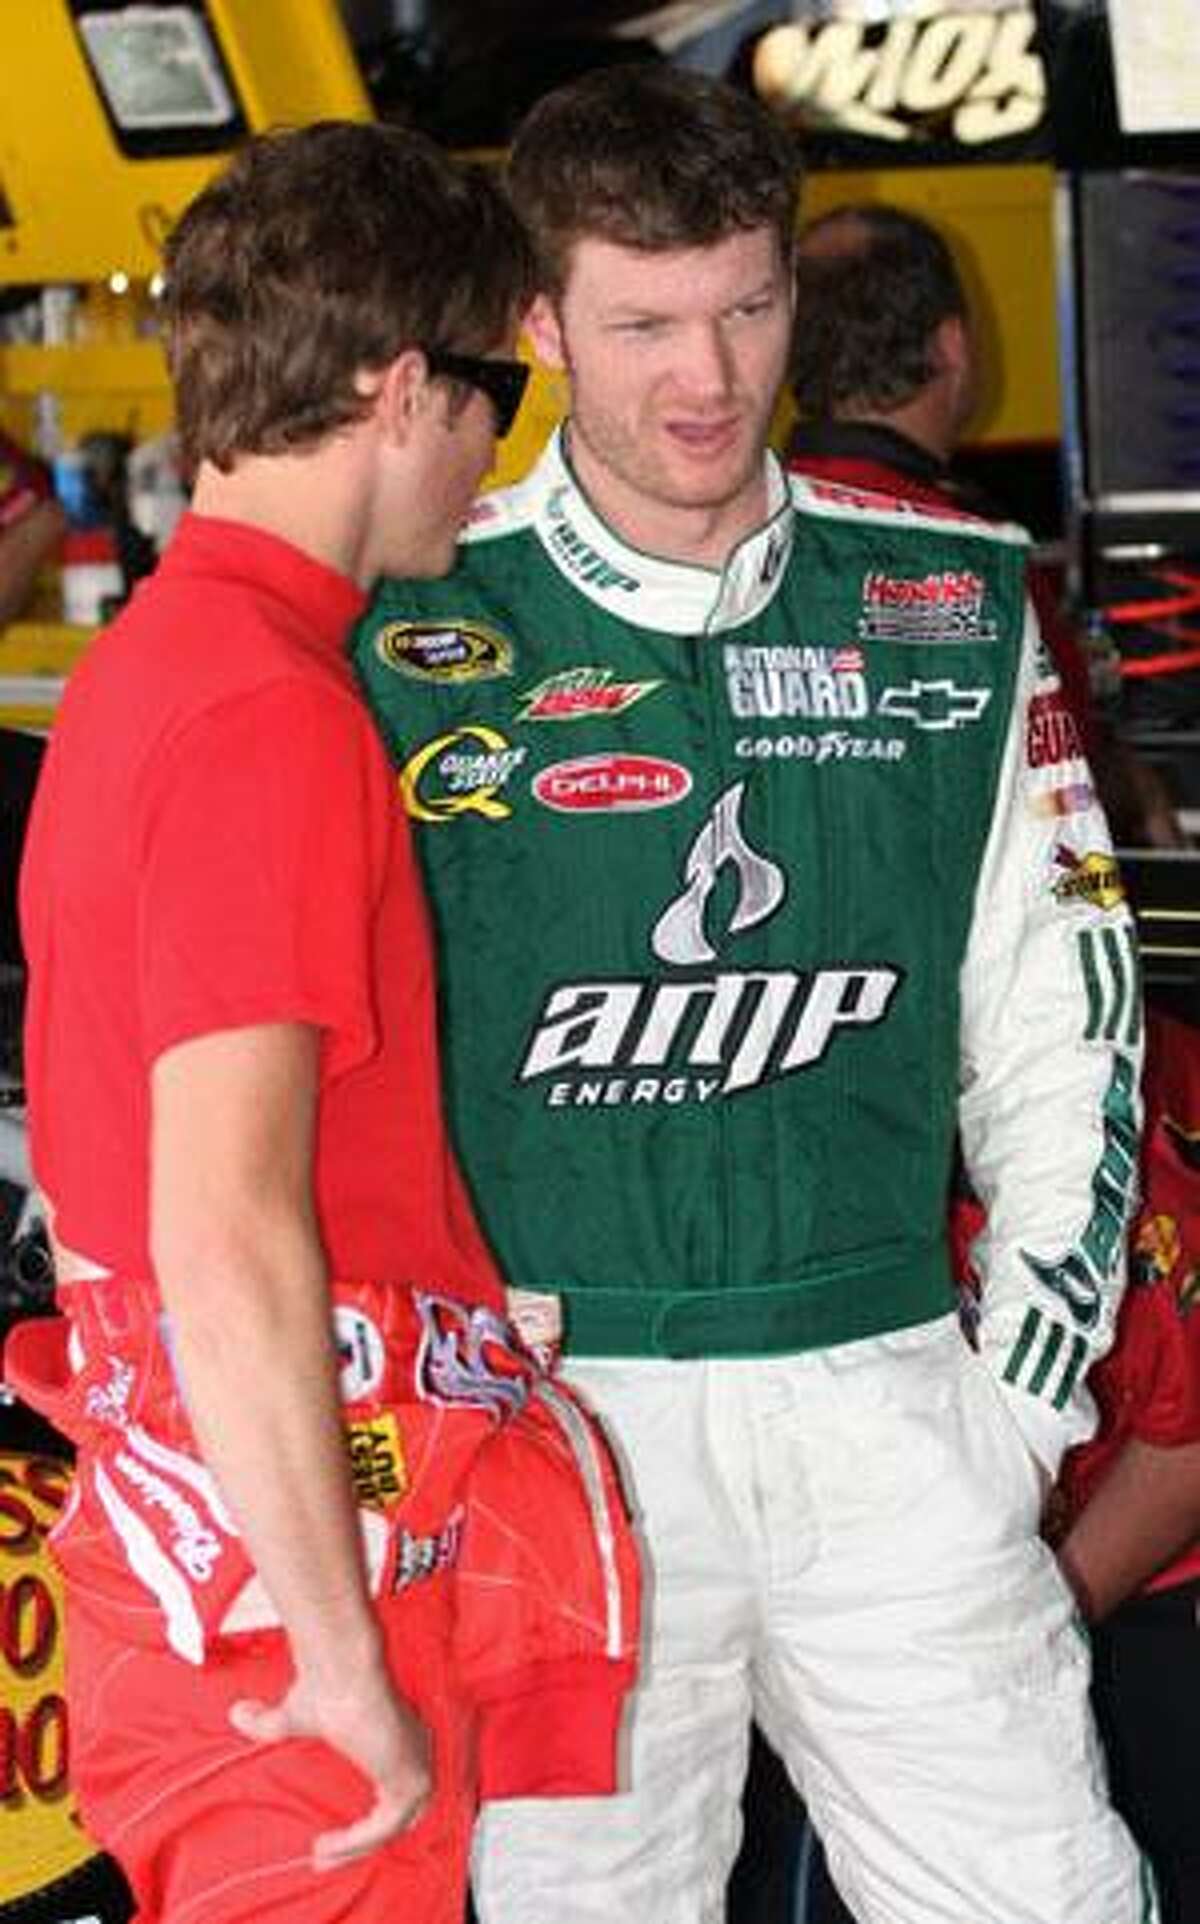 Drivers Kasey Kahne, left, and Dale Earnhardt Jr. talk in the garage area before practicing for the NASCAR Autism Speaks 400 Saturday in Dover, Del. (AP Photo/Russ Hamilton Jr.)